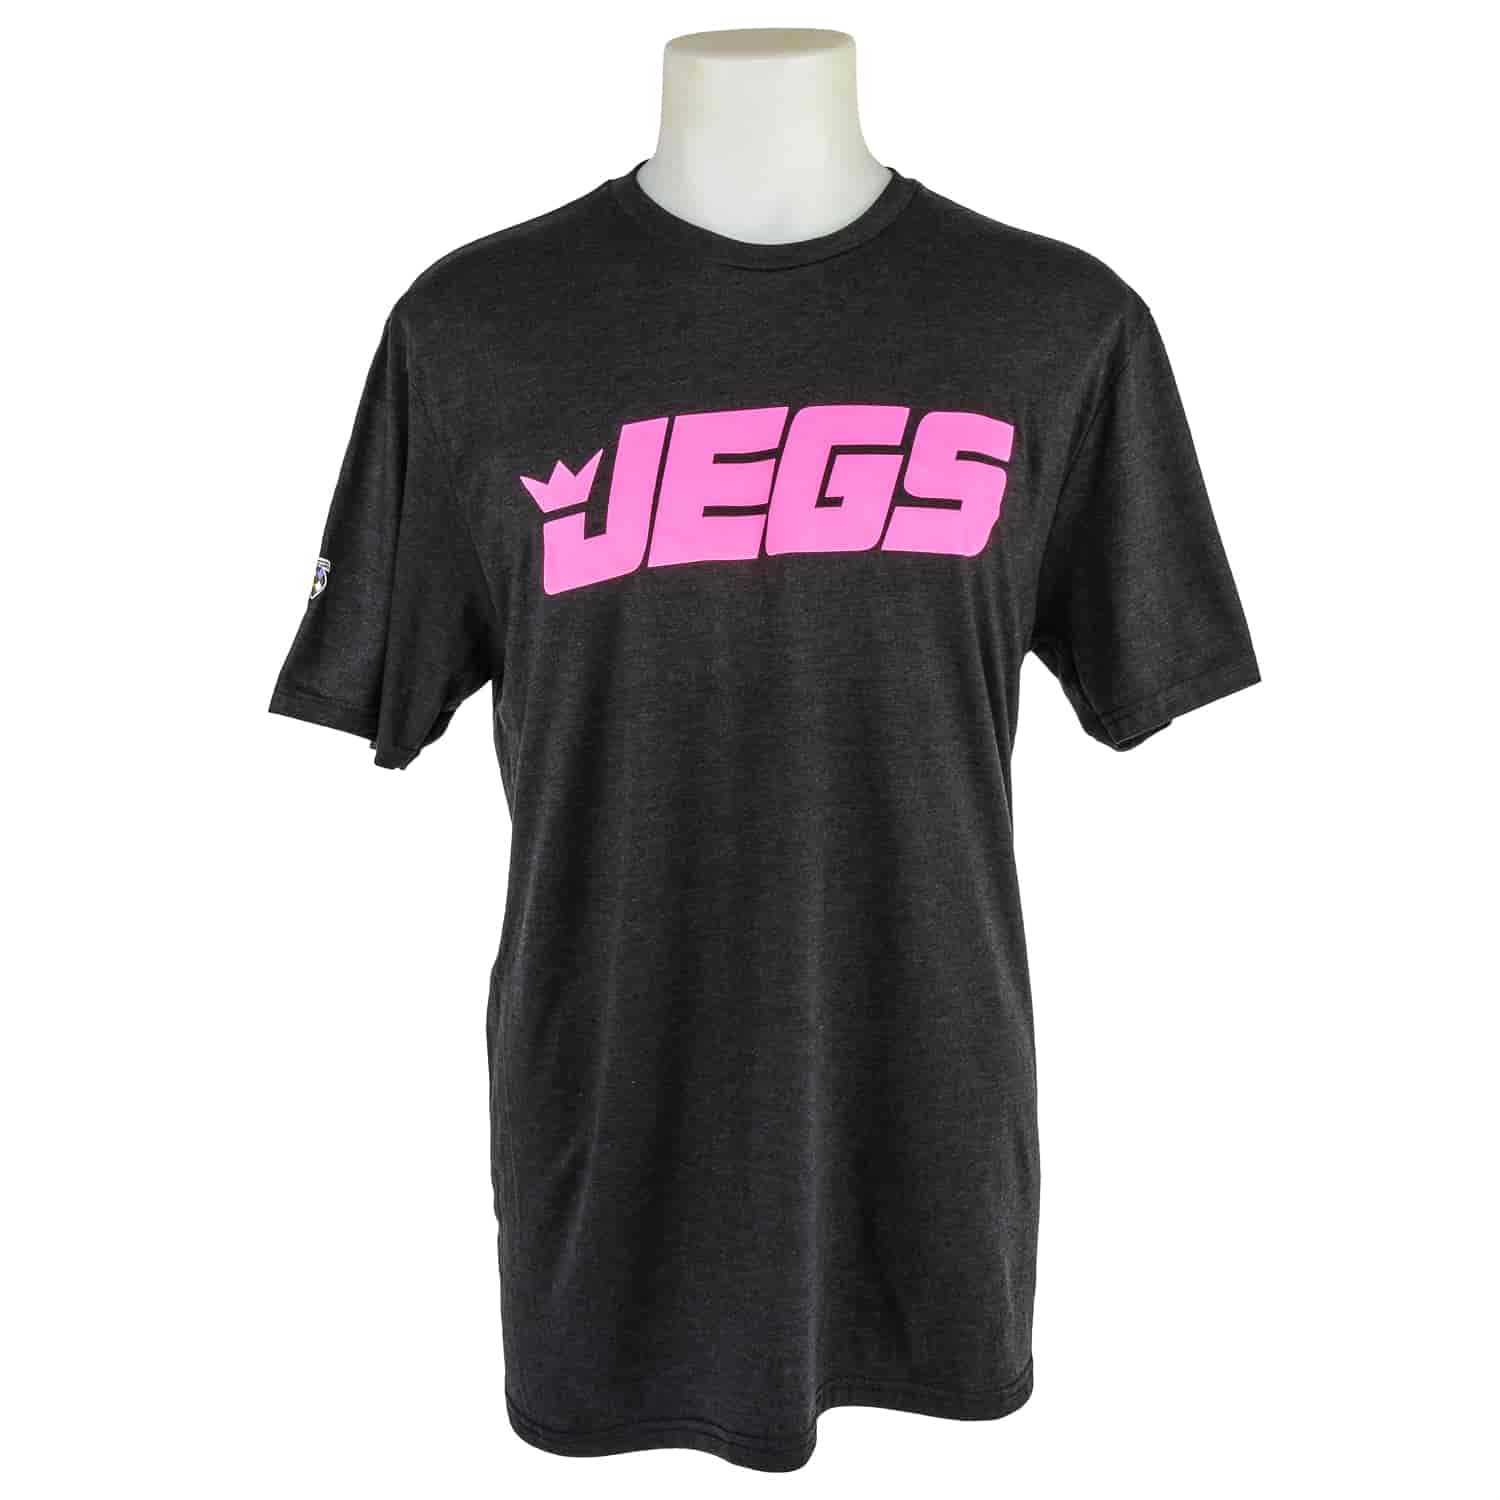 JEGS Breast Cancer Awareness T-Shirt